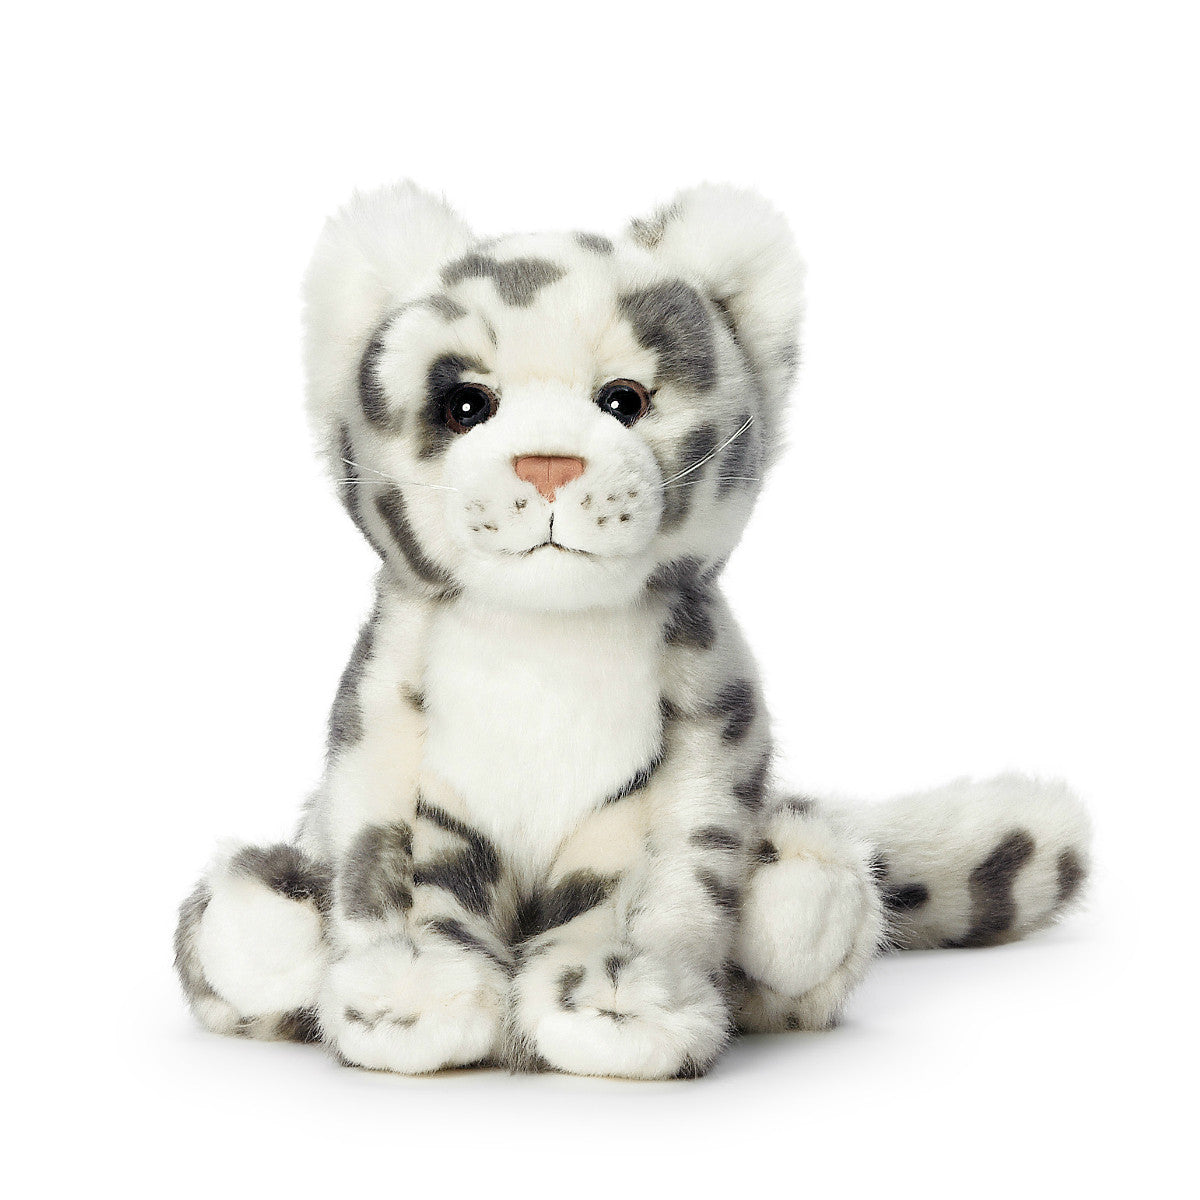 A photo of the snow leopard plush toy